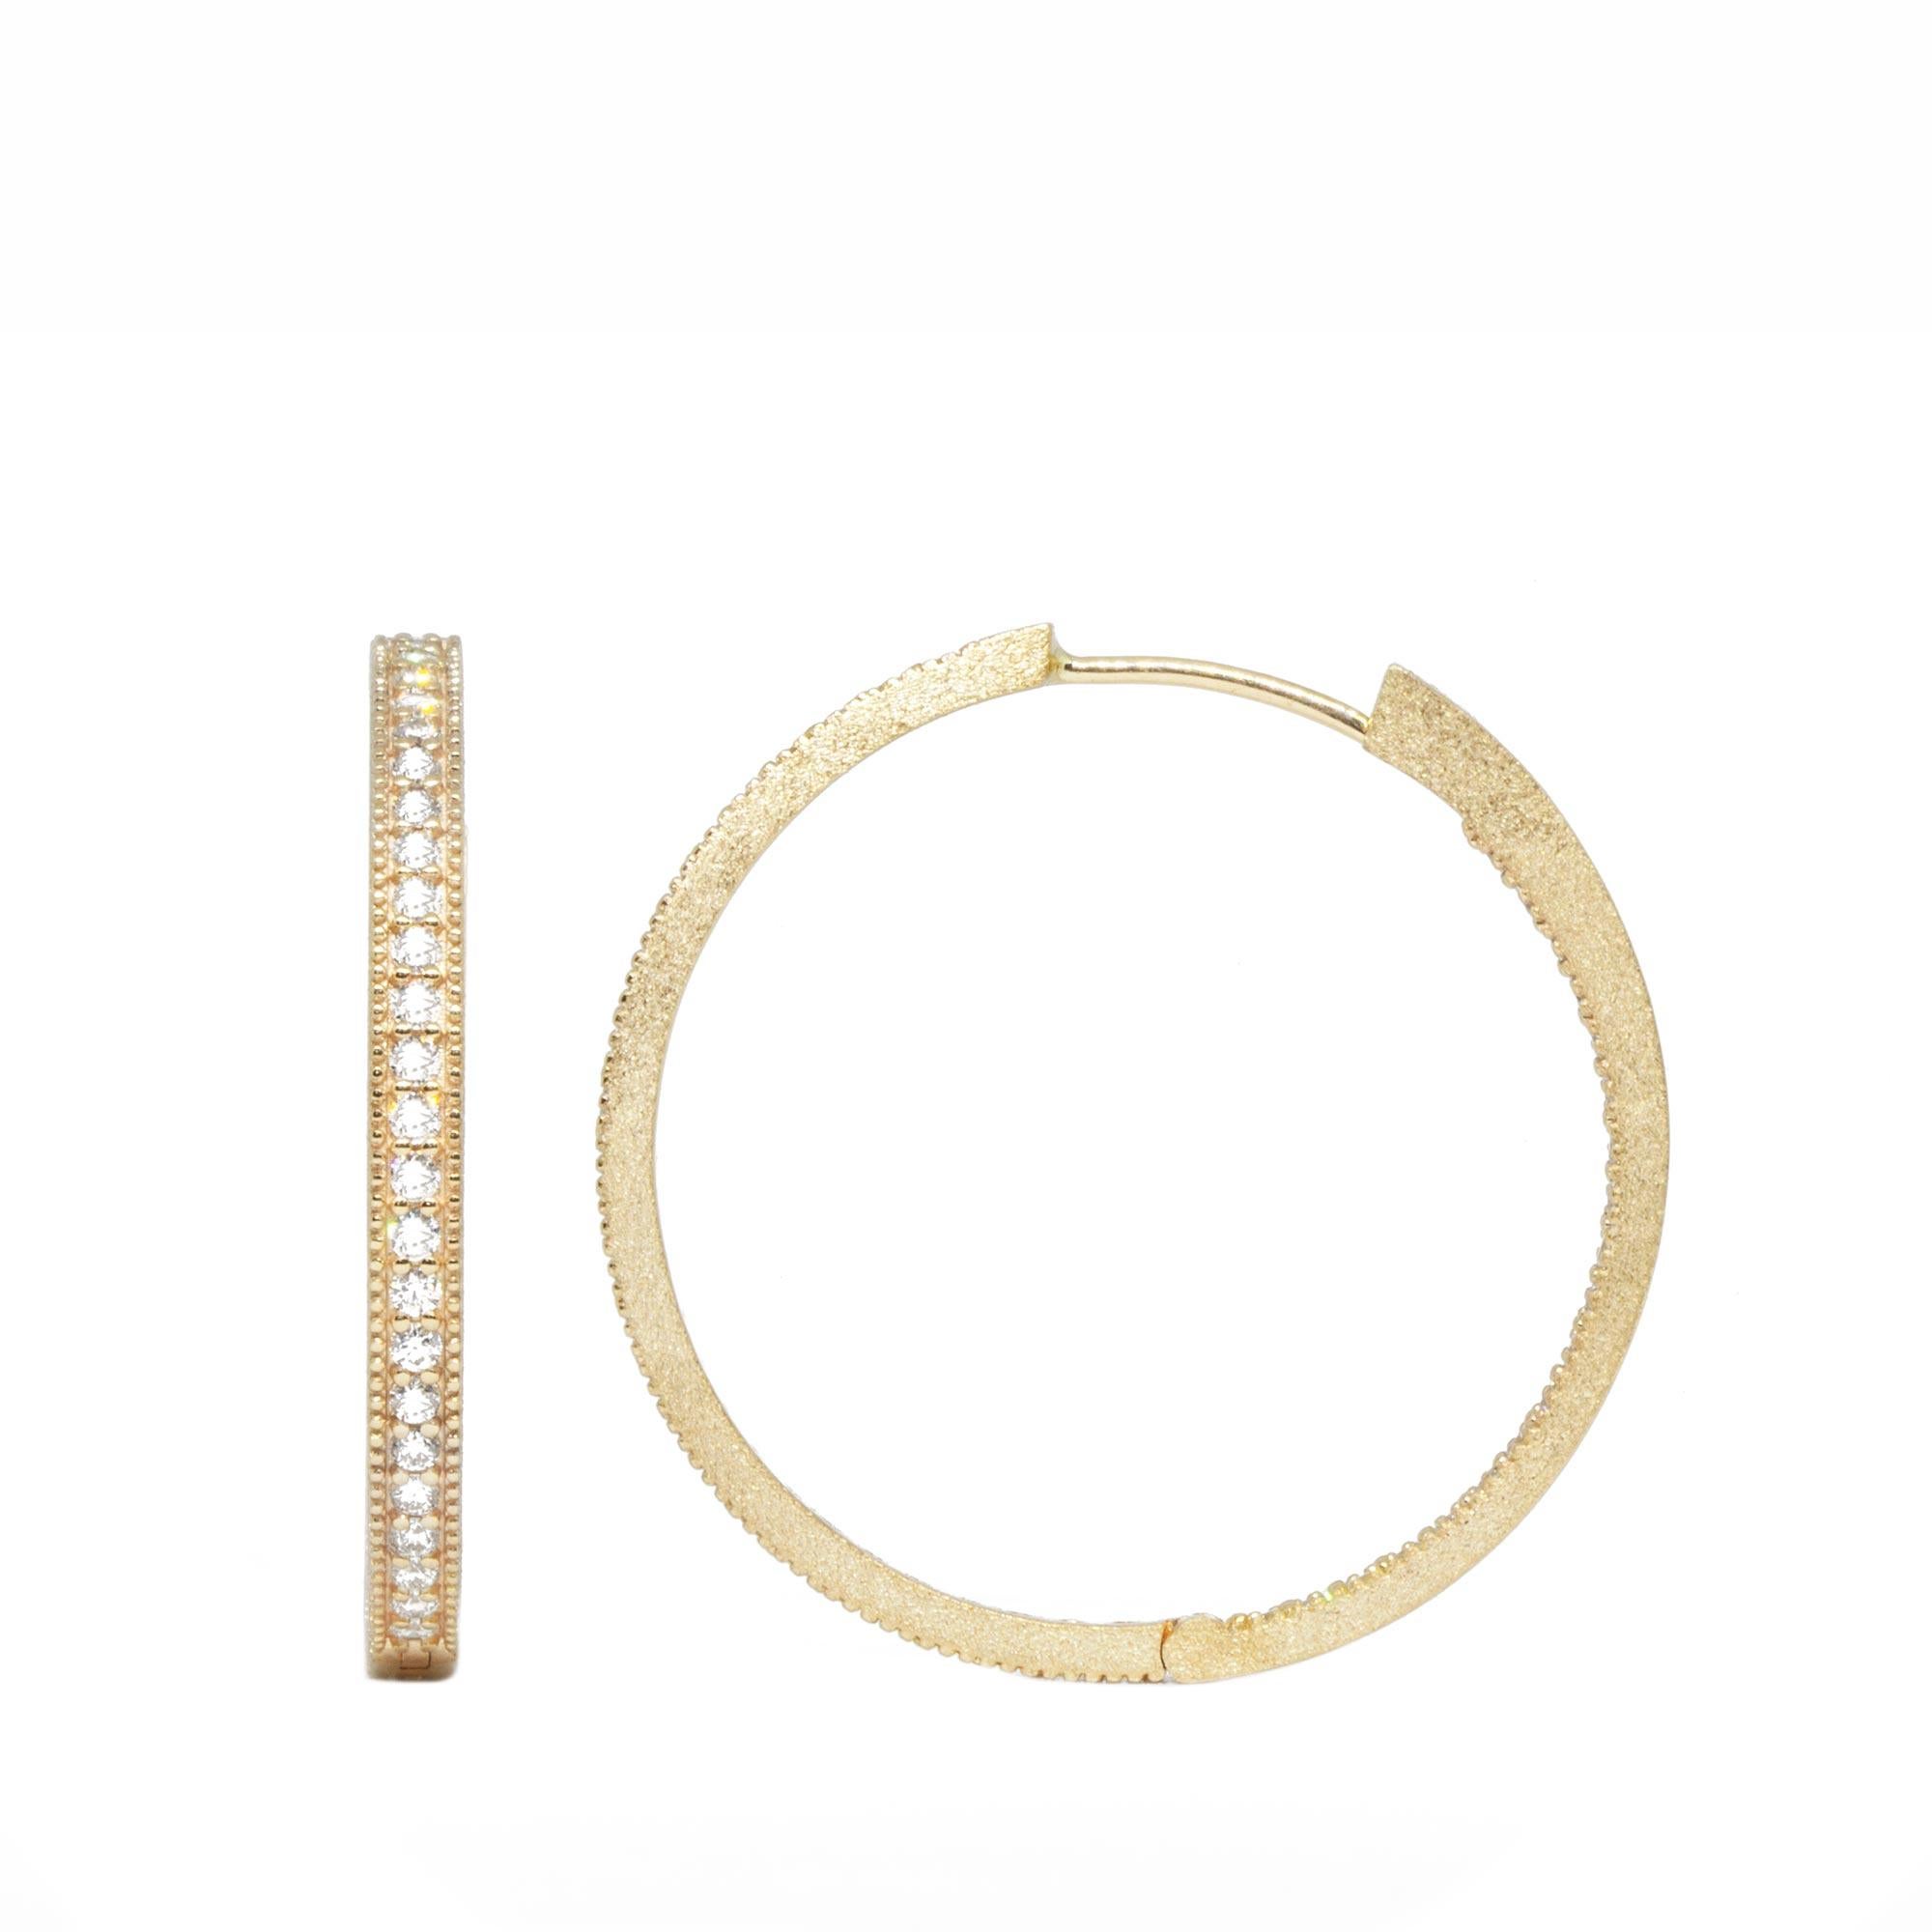 A slender—and lightweight—version of our Large Gold Hoop Earrings, with smooth polished edges and delicate gemstones (but you still get a lot of sparkles and shine). Customers love this style for piling on earring charms; one popular look is to wear